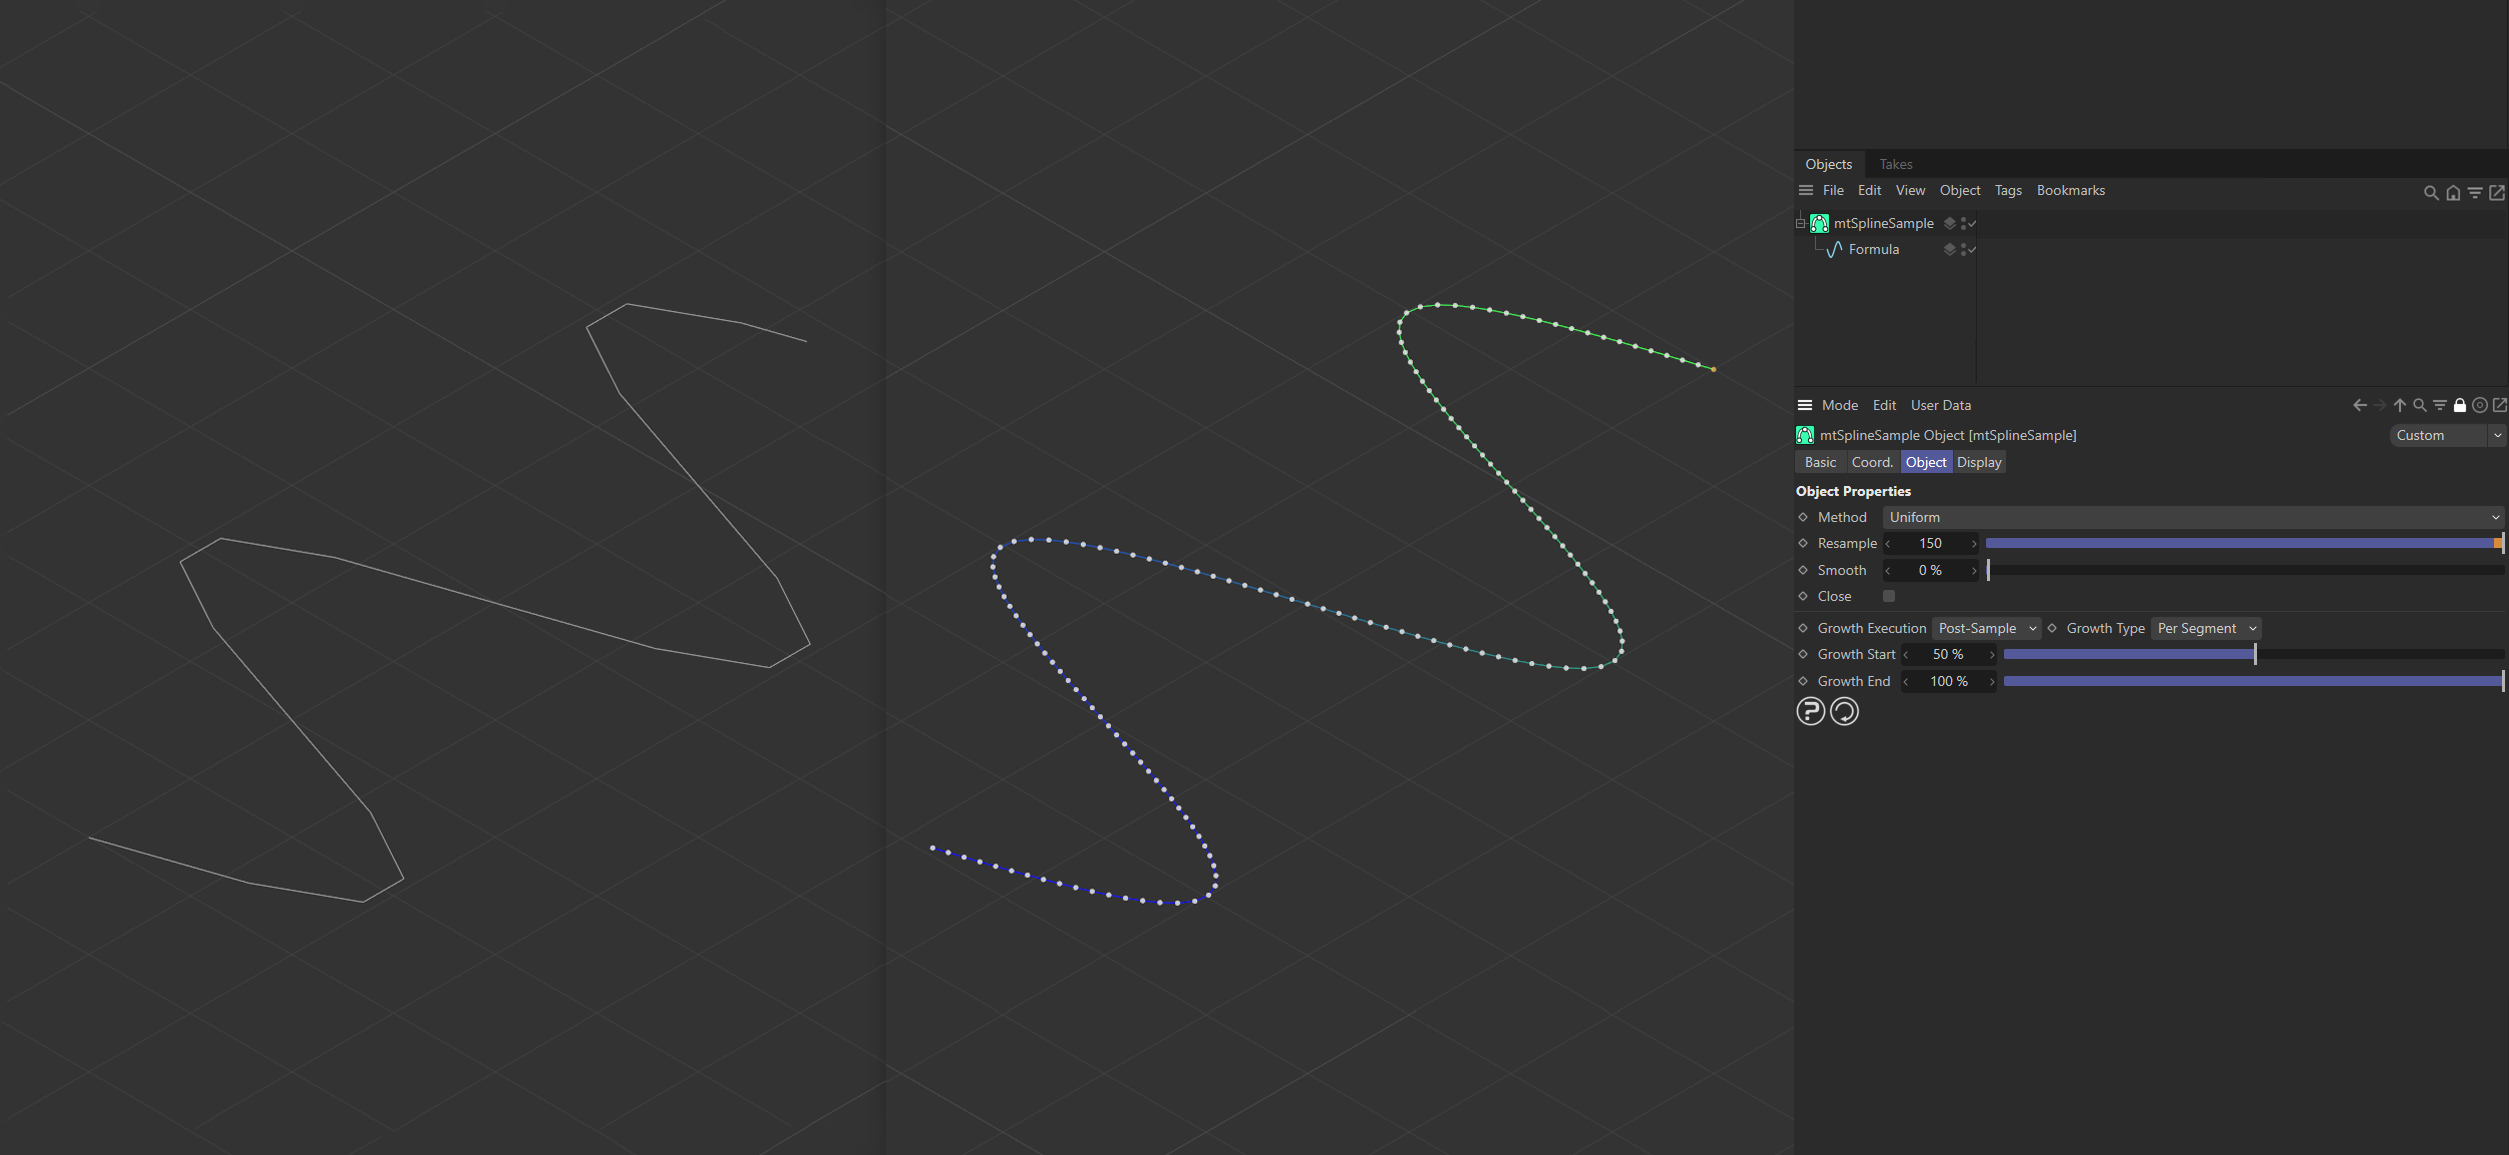 The original spline on the left has very few, unevenly distributed points. An identical spline has been placed as a child of a mtSplineSample on the right. This has been resampled using 150 points. The result is a smooth, higher-quality spline.